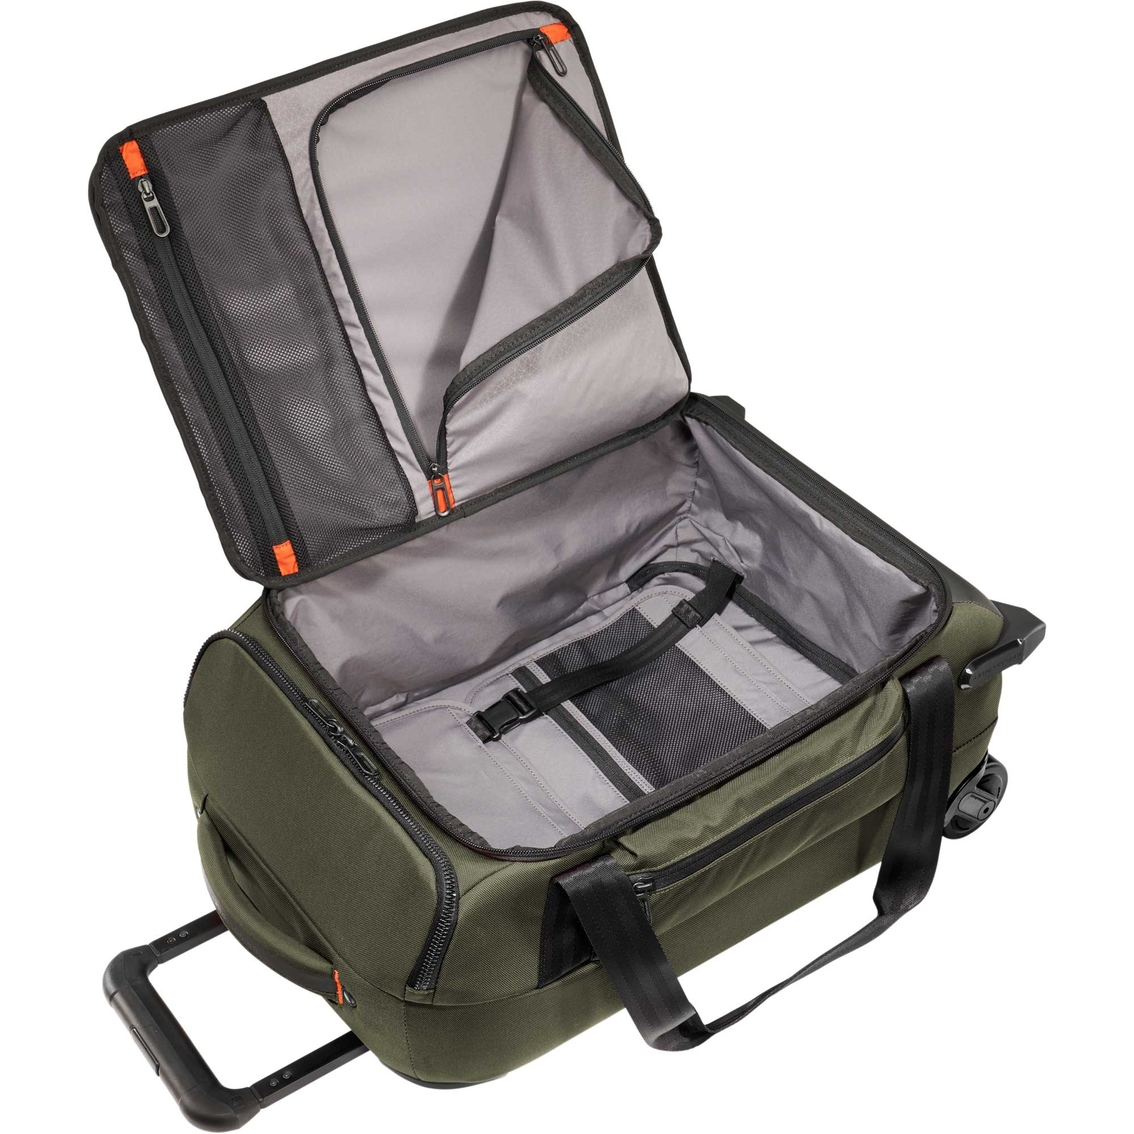 Briggs & Riley ZDX 21 in. Carry On Wheeled Duffel - Image 6 of 10